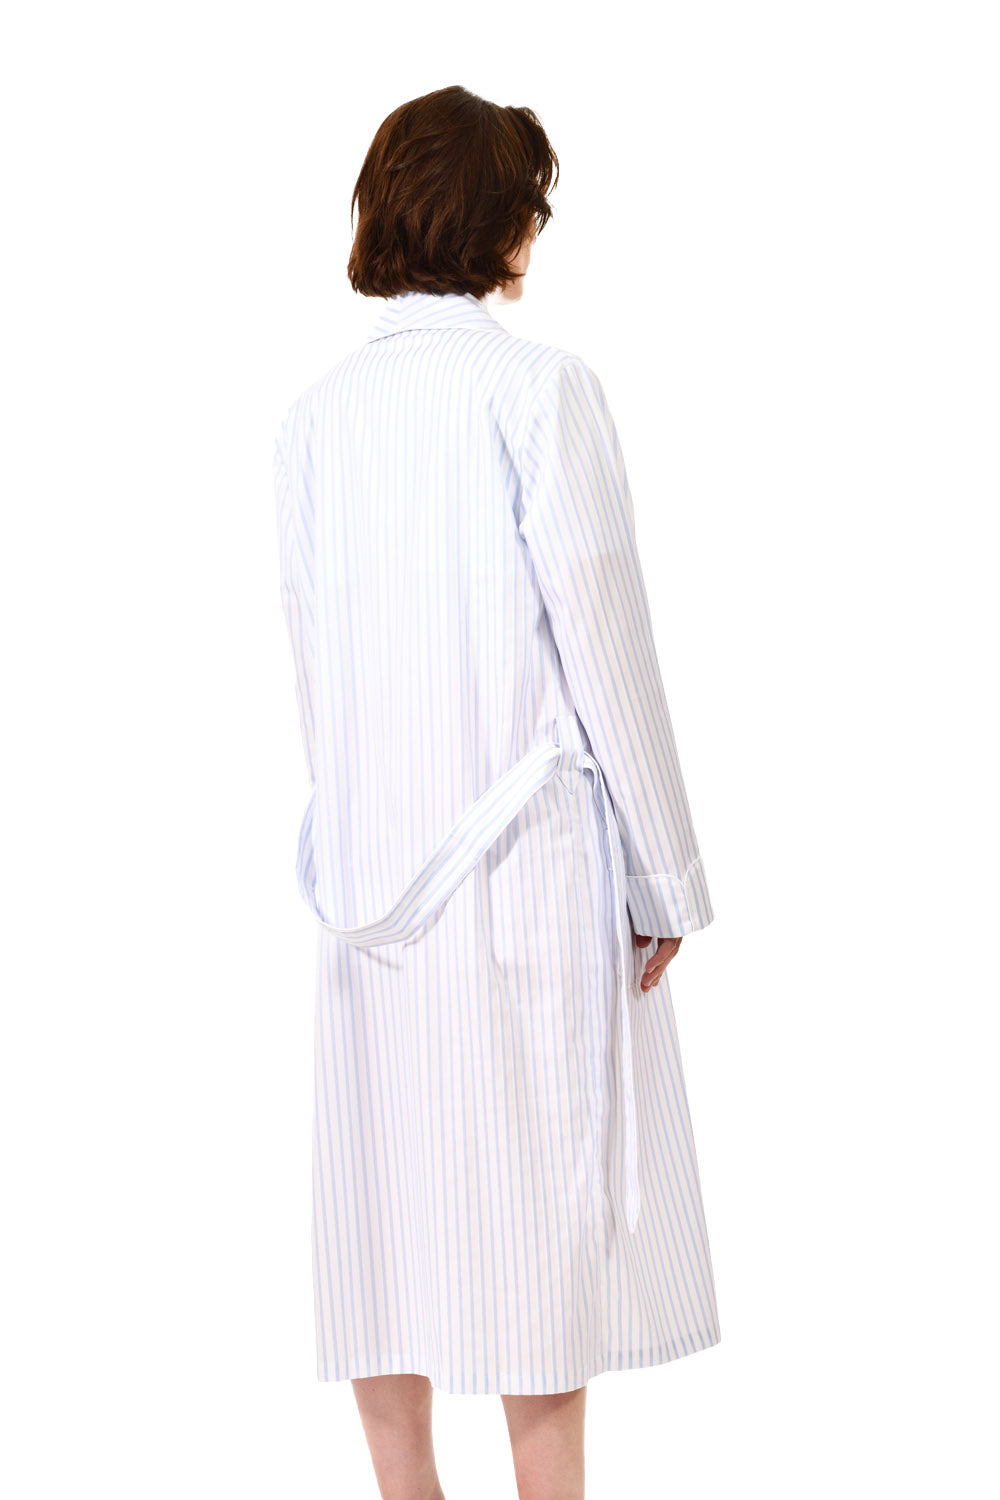 The Brandy in white poplin cotton with blue stripes